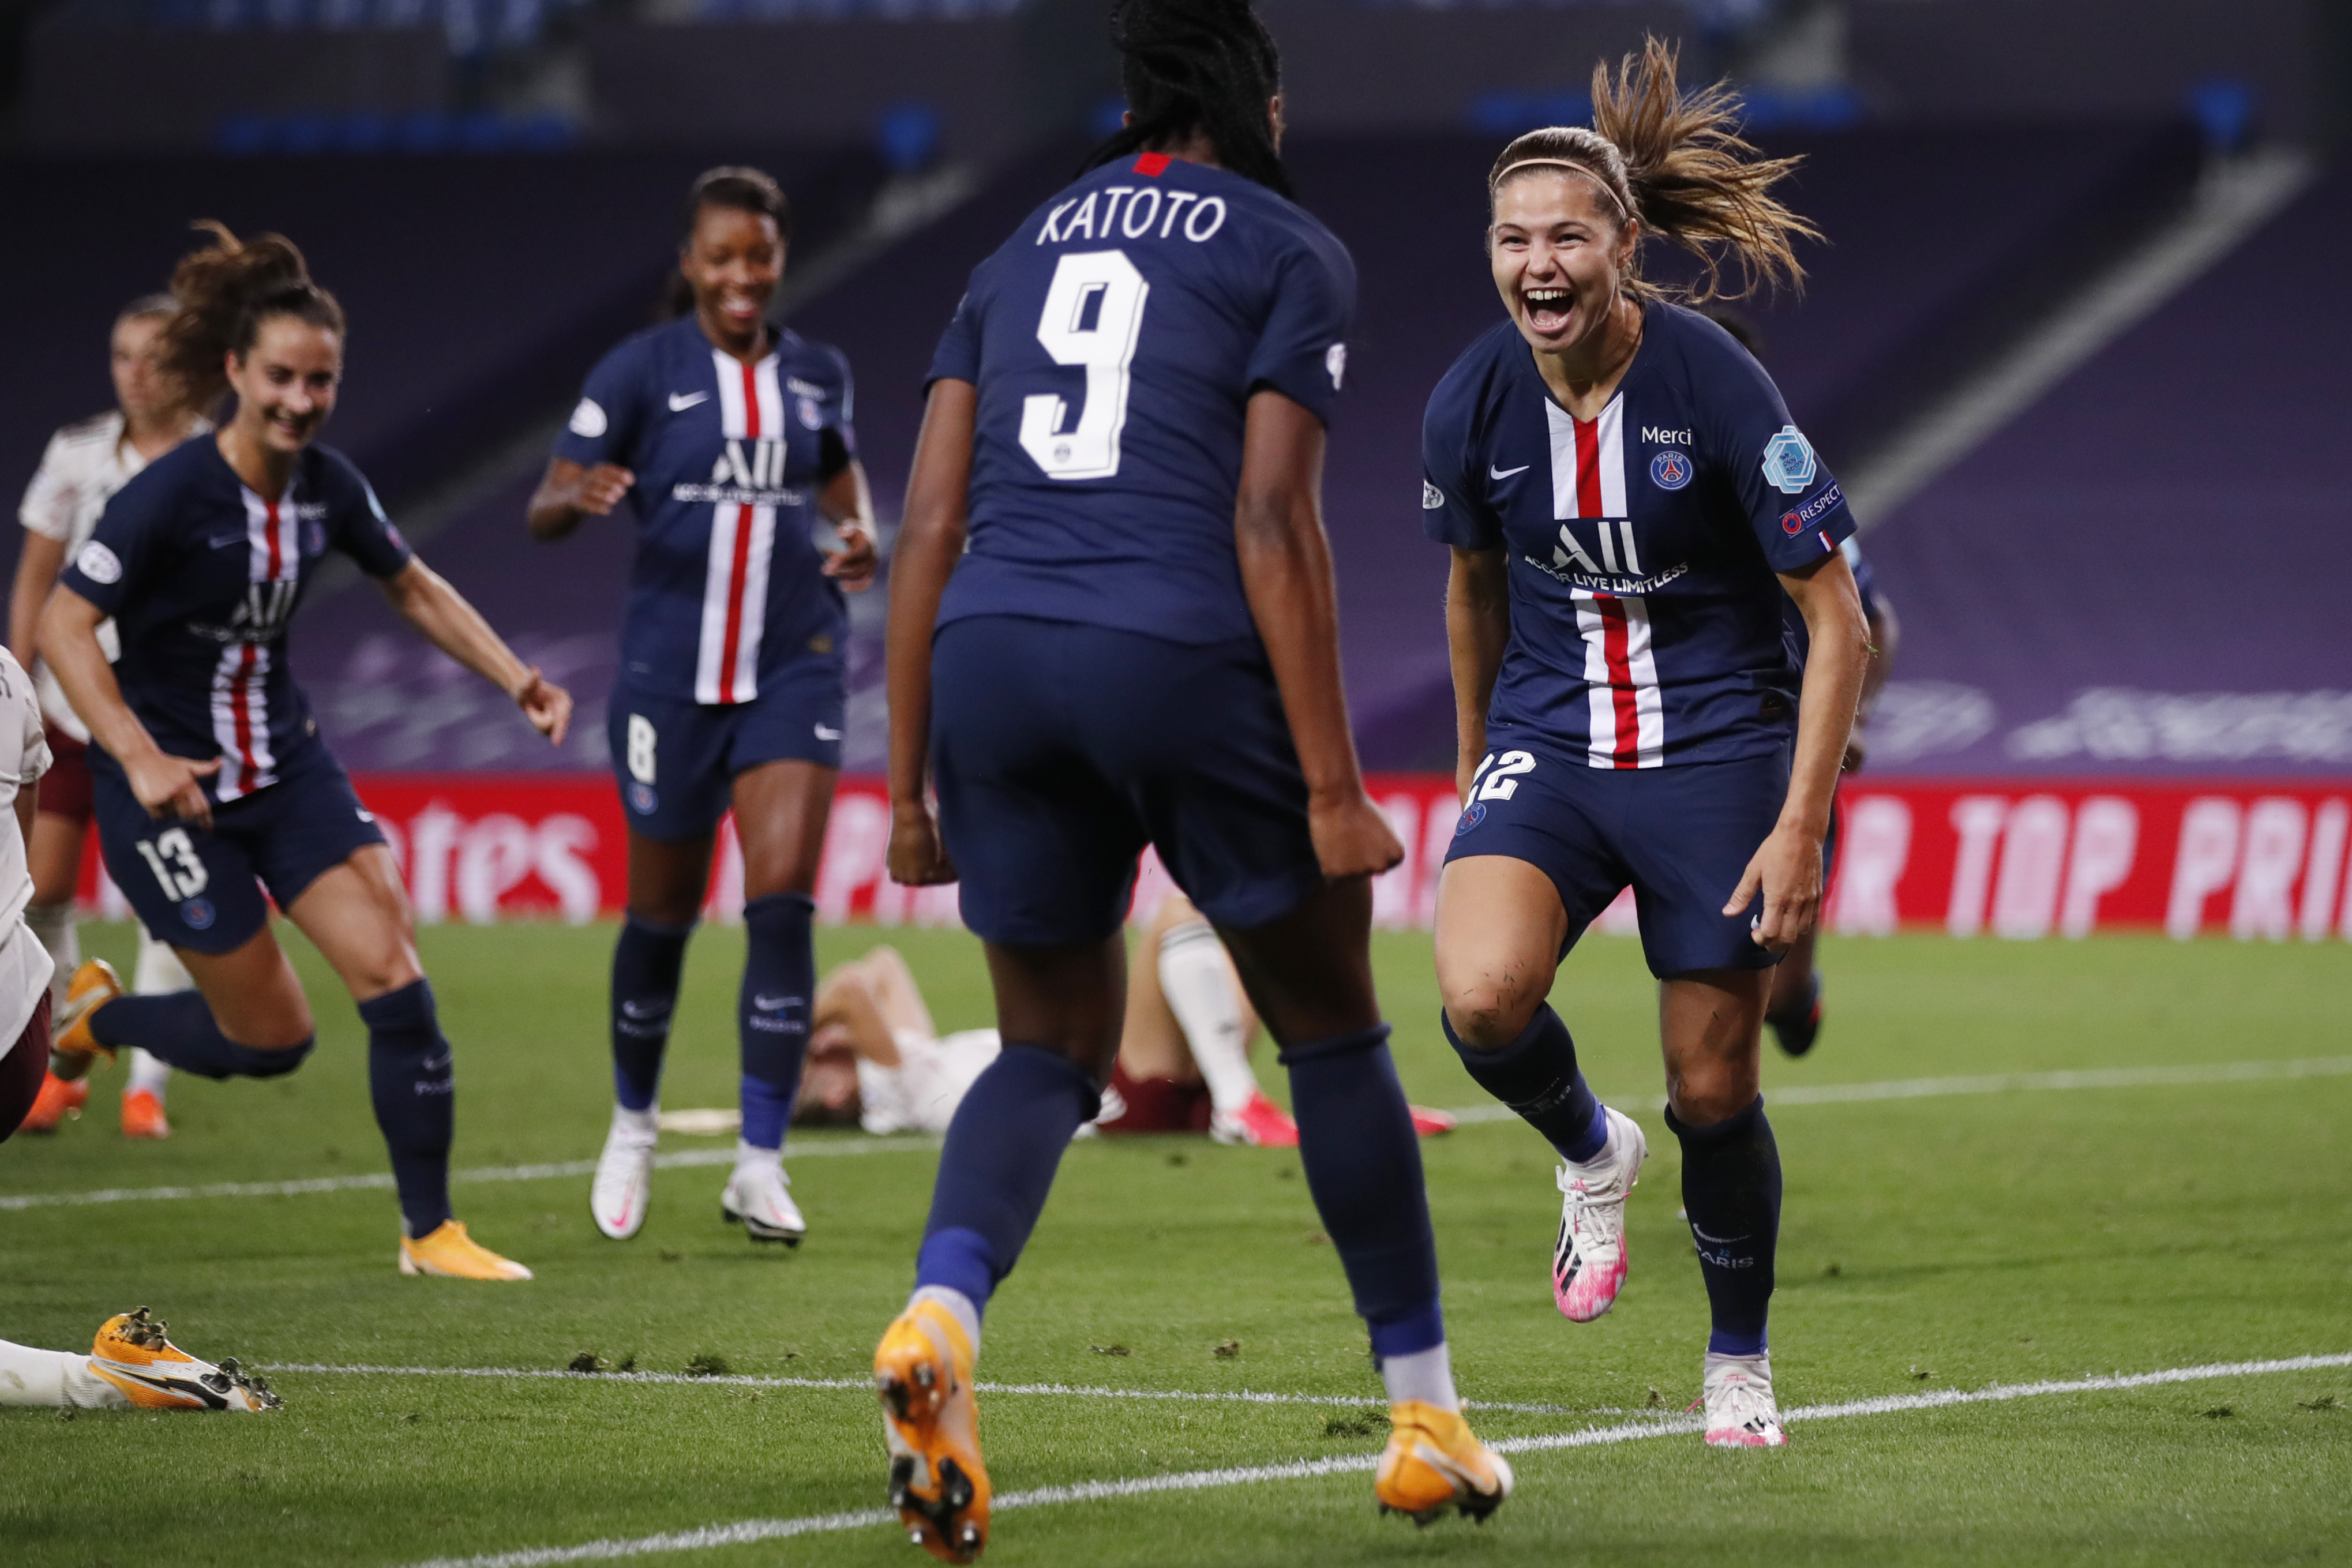 PSG vs. Olympique Lyon LIVE STREAM (11/20/20): Watch Division 1 Feminine  online | Time, USA TV, channel 